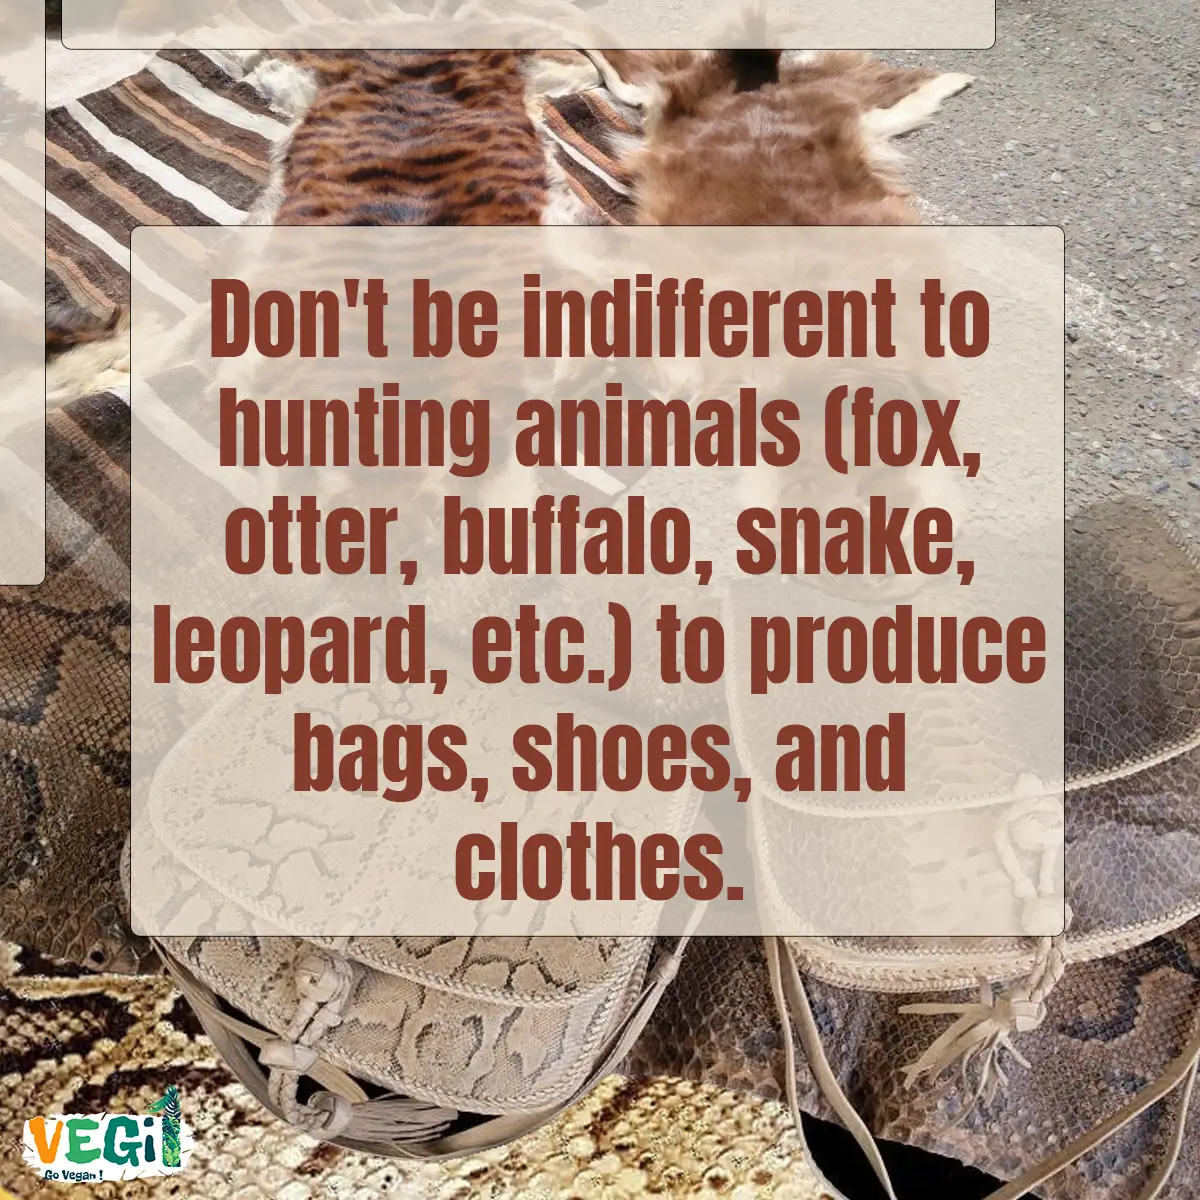 Don't be indifferent to hunting animals (fox, otter, buffalo, snake, leopard, etc.) to produce bags, shoes, and clothes.
